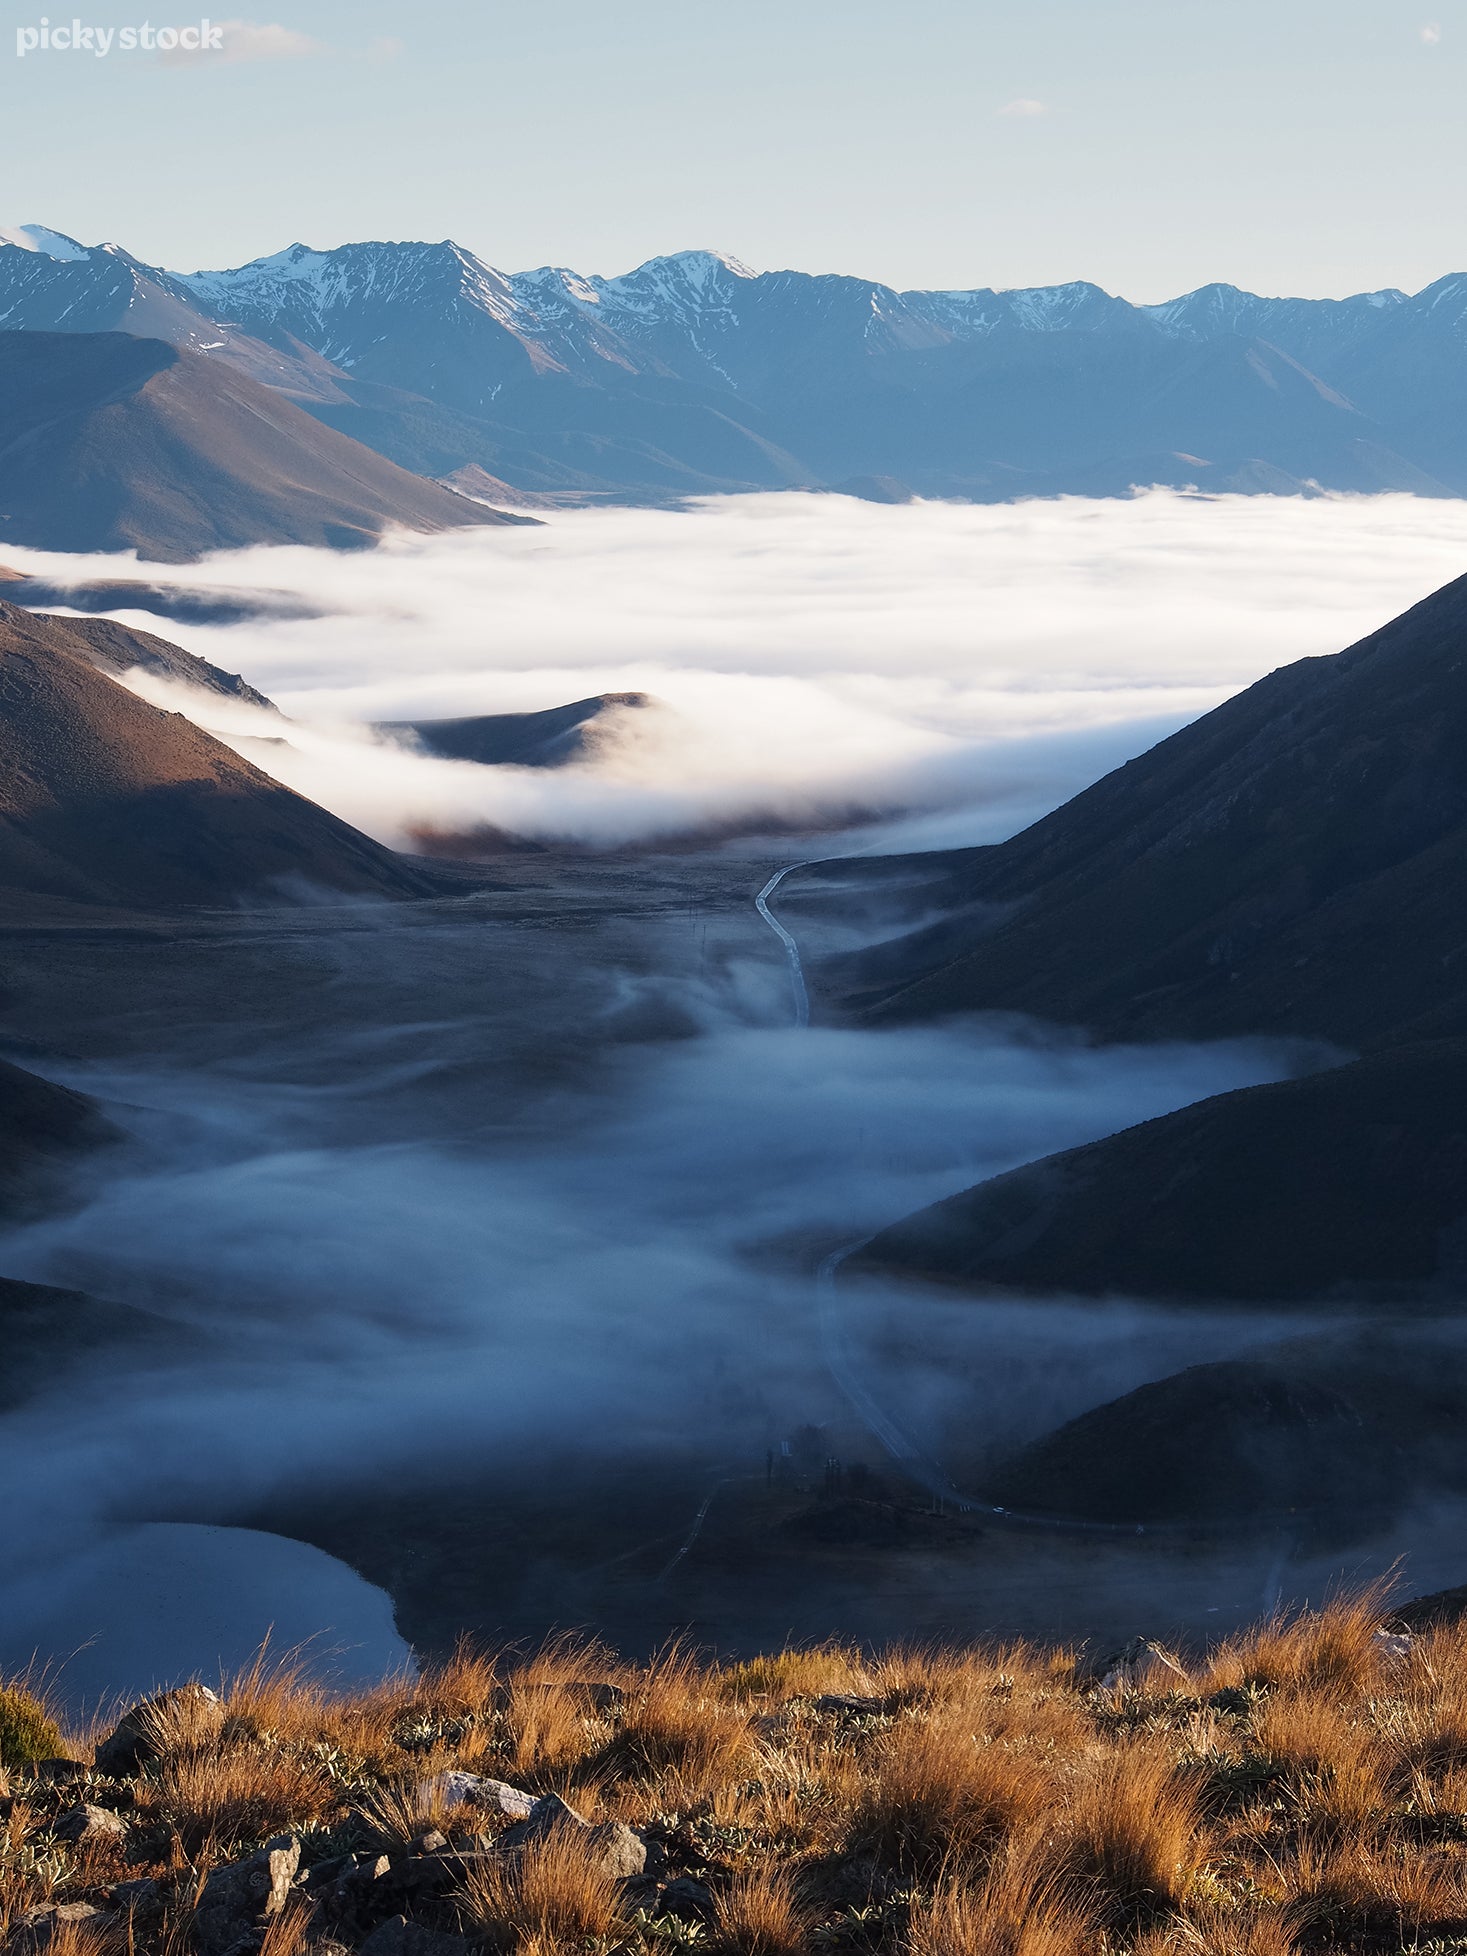 Portrait of a mountainous valley from atop a hill of rough brown grass. A single road winds the shady contours of the valley and disappears into a lake of dense white fog.